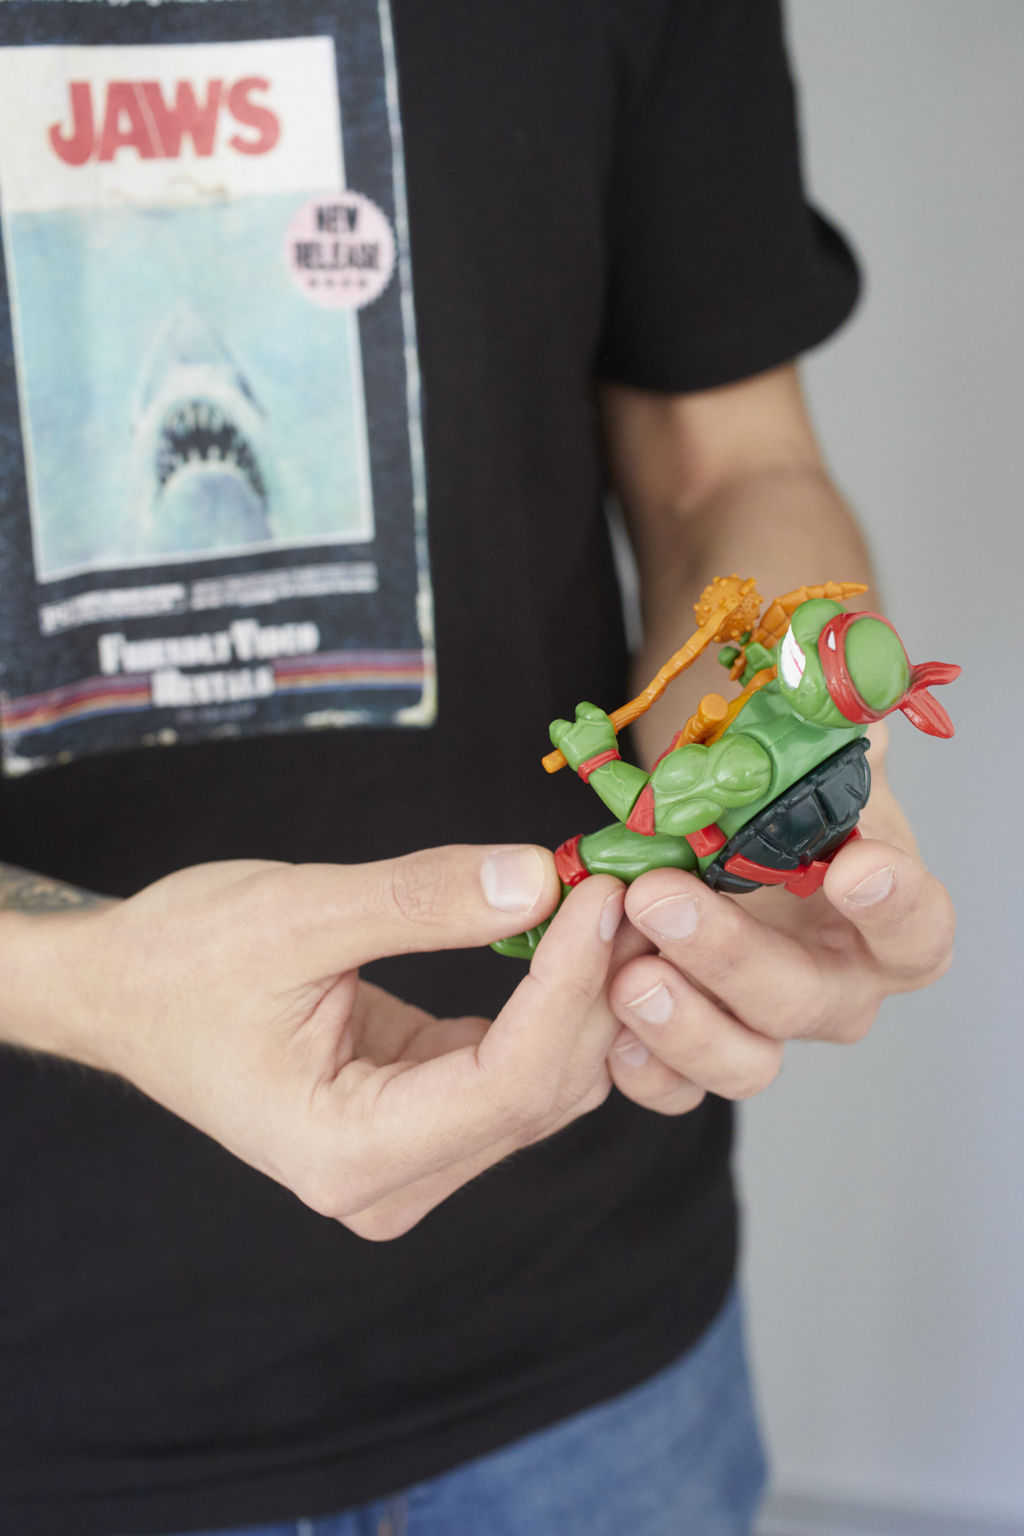 His interest in collecting was revived after finding a shoebox of his original Ninja Turtle figures a few years ago. Photo: Nicky Ryan